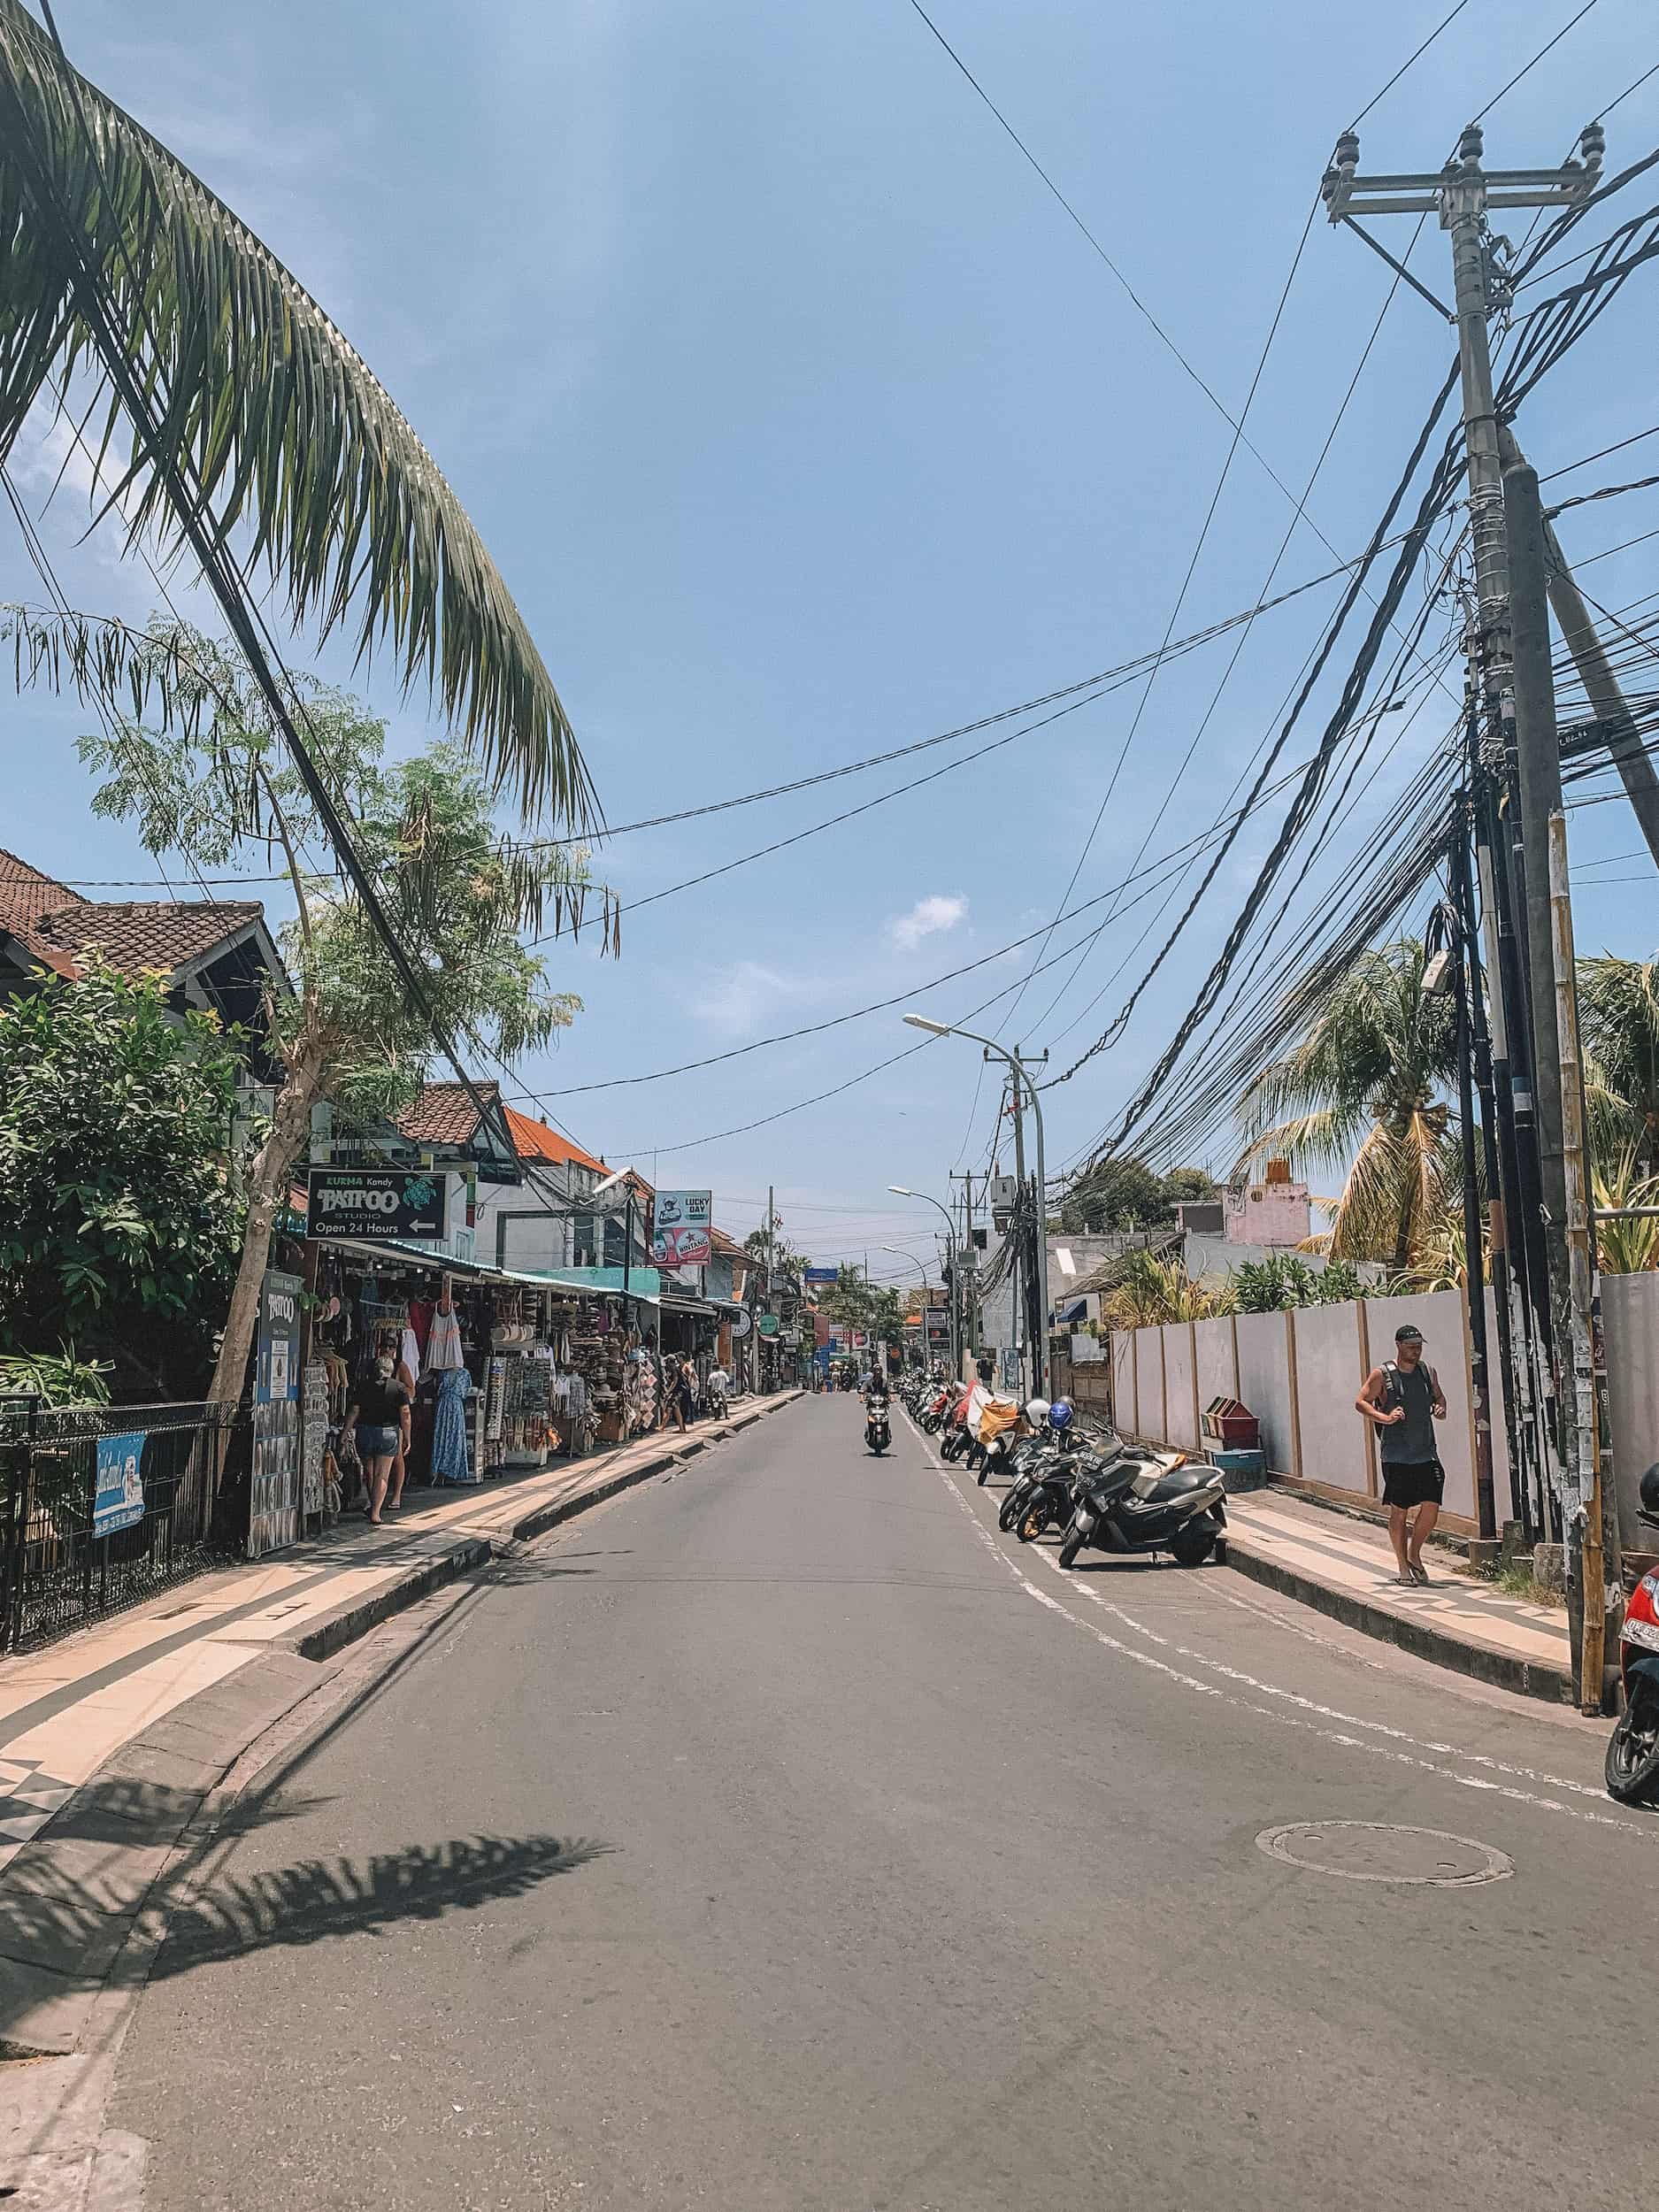 Taken down a street in Bali. The road is empty except 1 bike. There are scooters parked on the right side and local shops to the left